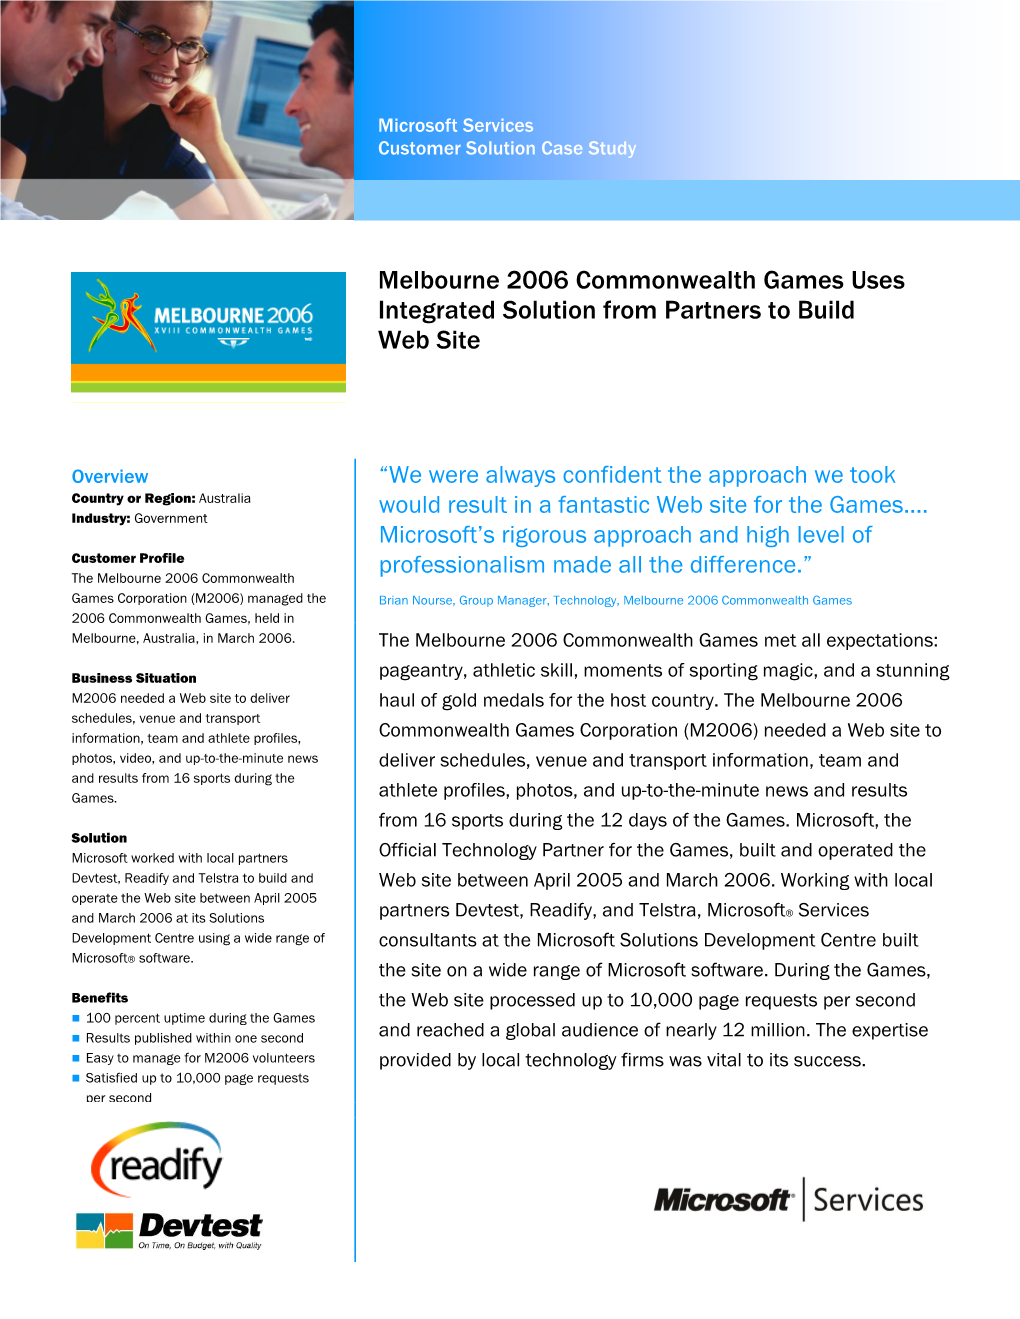 Melbourne 2006 Commonwealth Games Uses Integrated Solution To